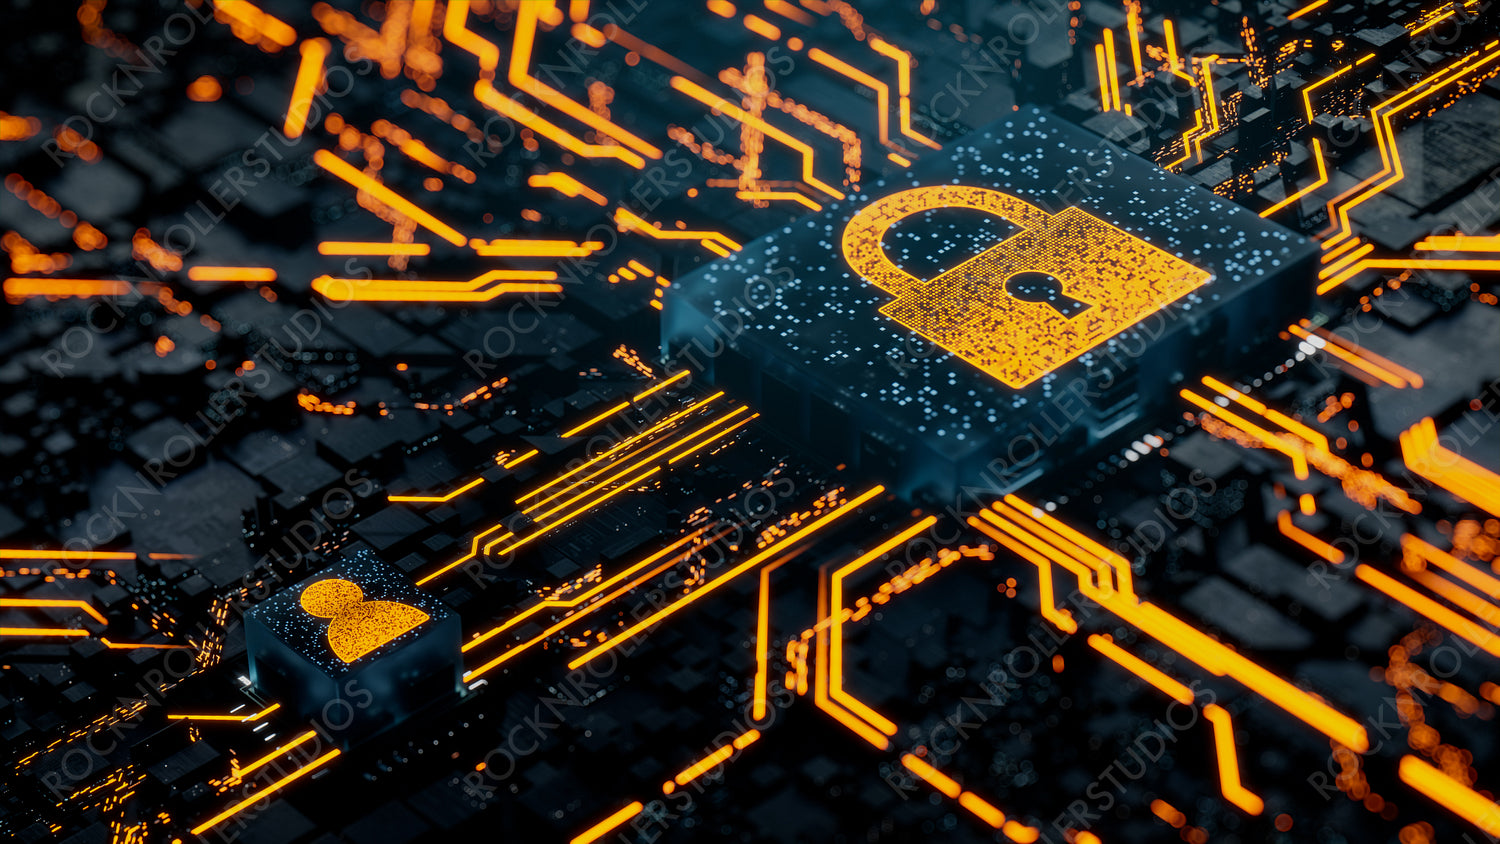 Security Technology Concept with lock symbol on a Microchip. Orange Neon Data flows between the CPU and the User across a Futuristic Motherboard. 3D render.